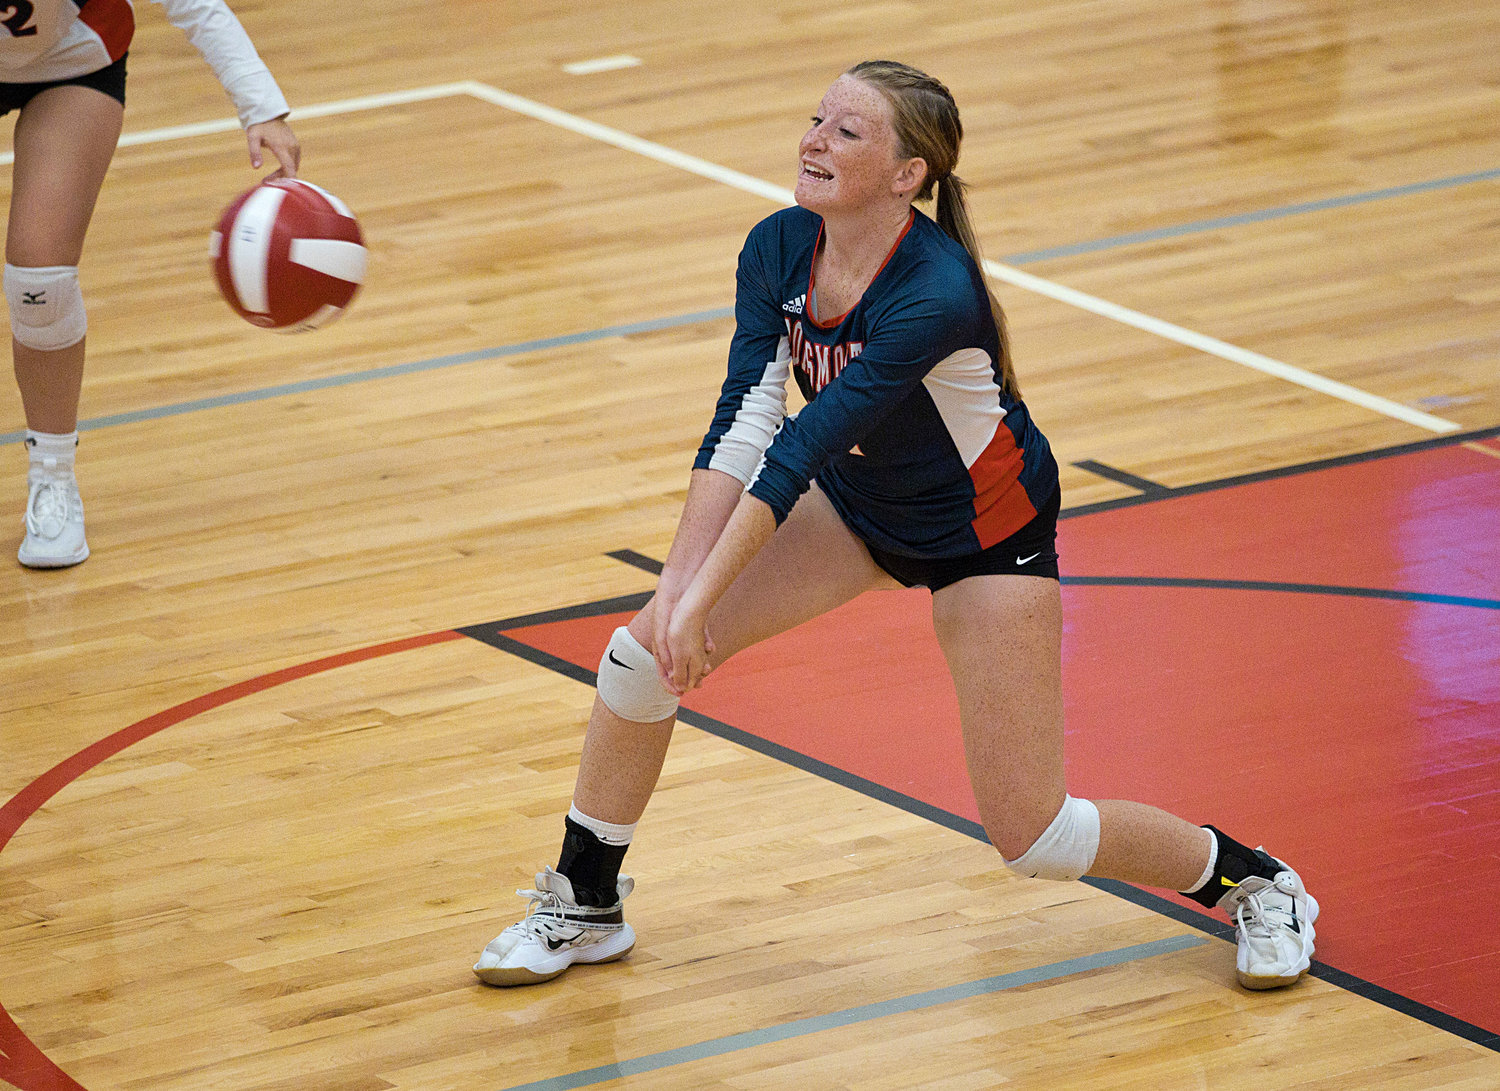 Adele Palmer receives a serve during Friday's game.